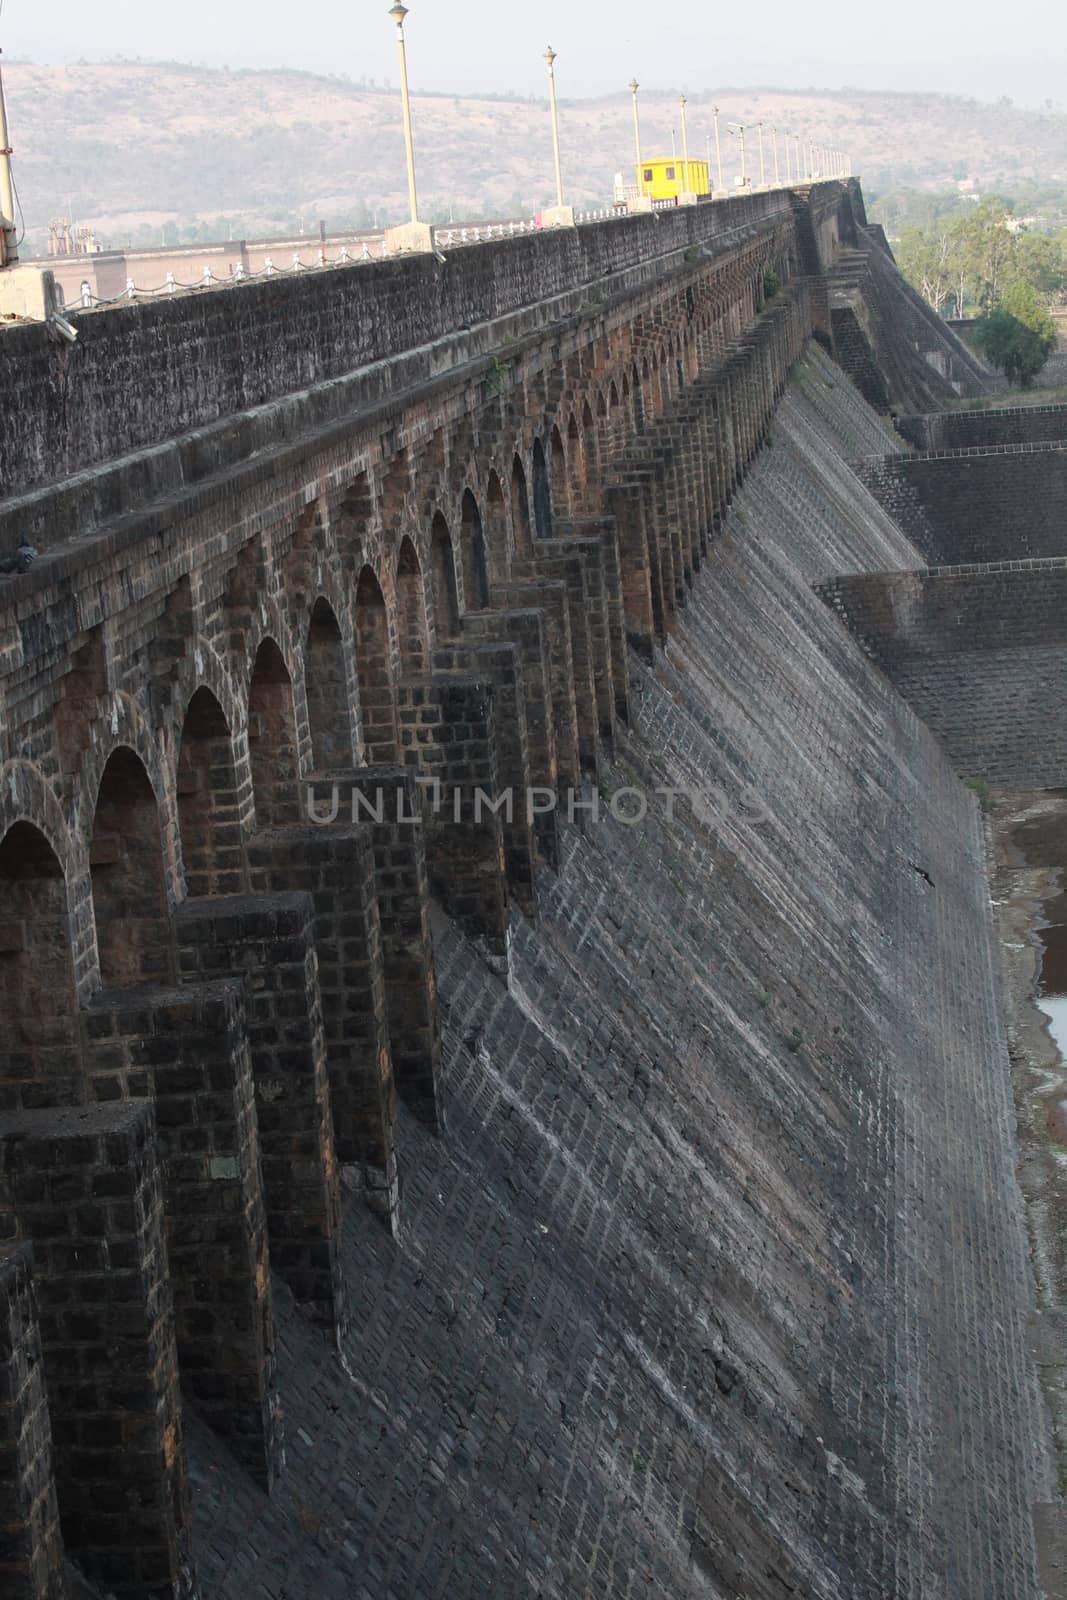 A view of the architecture of an old dam wall made of stones in India.